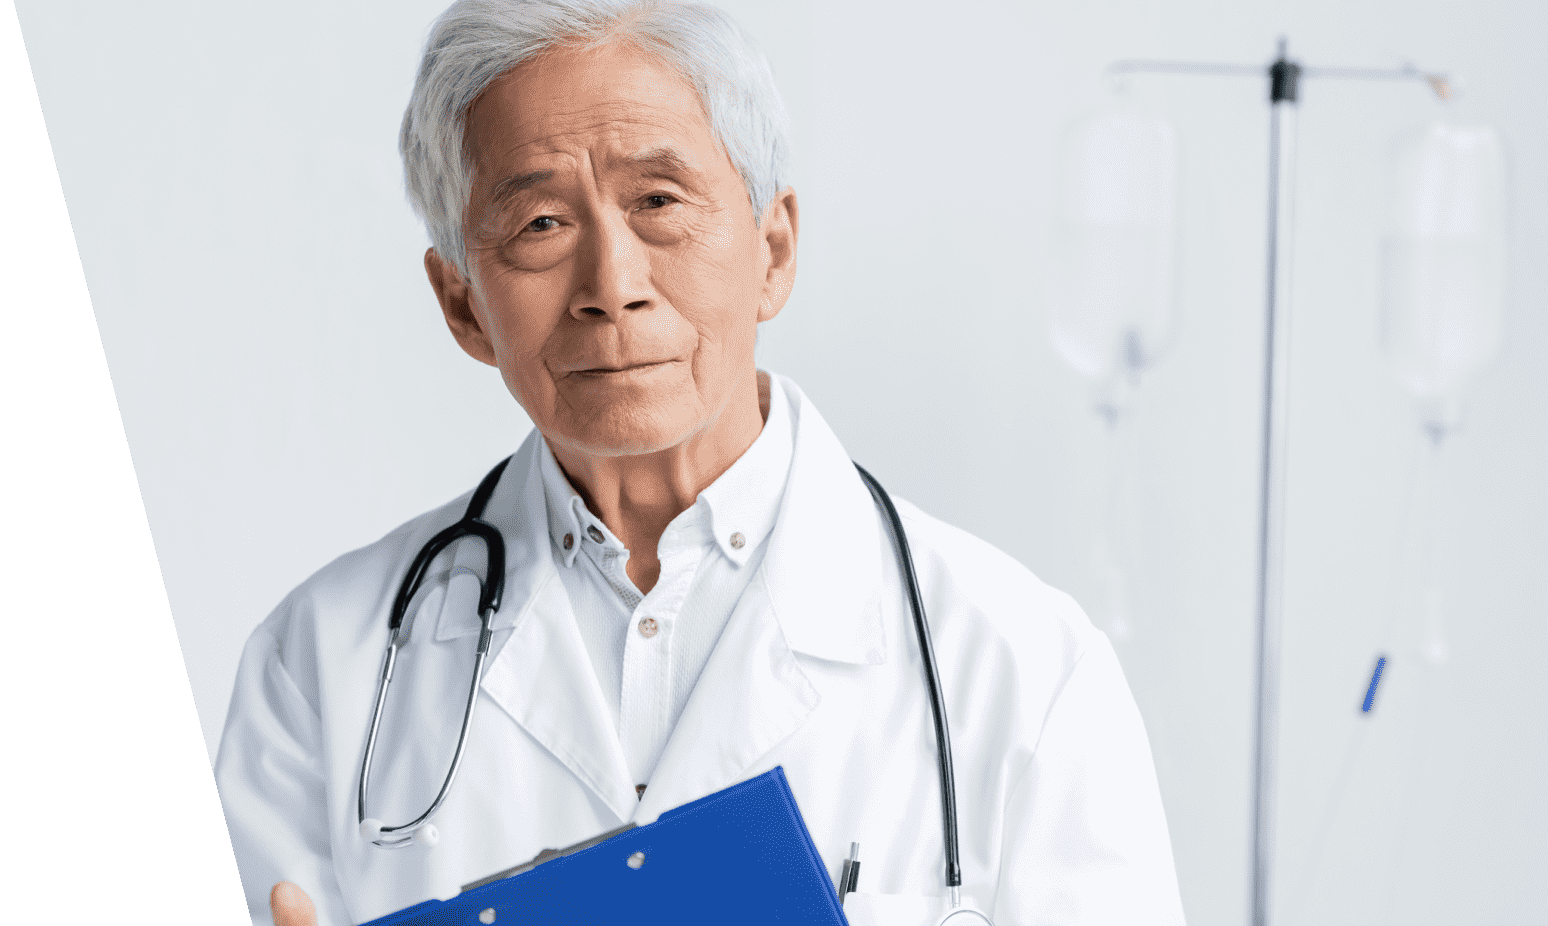 An older doctor holding a blue clip board